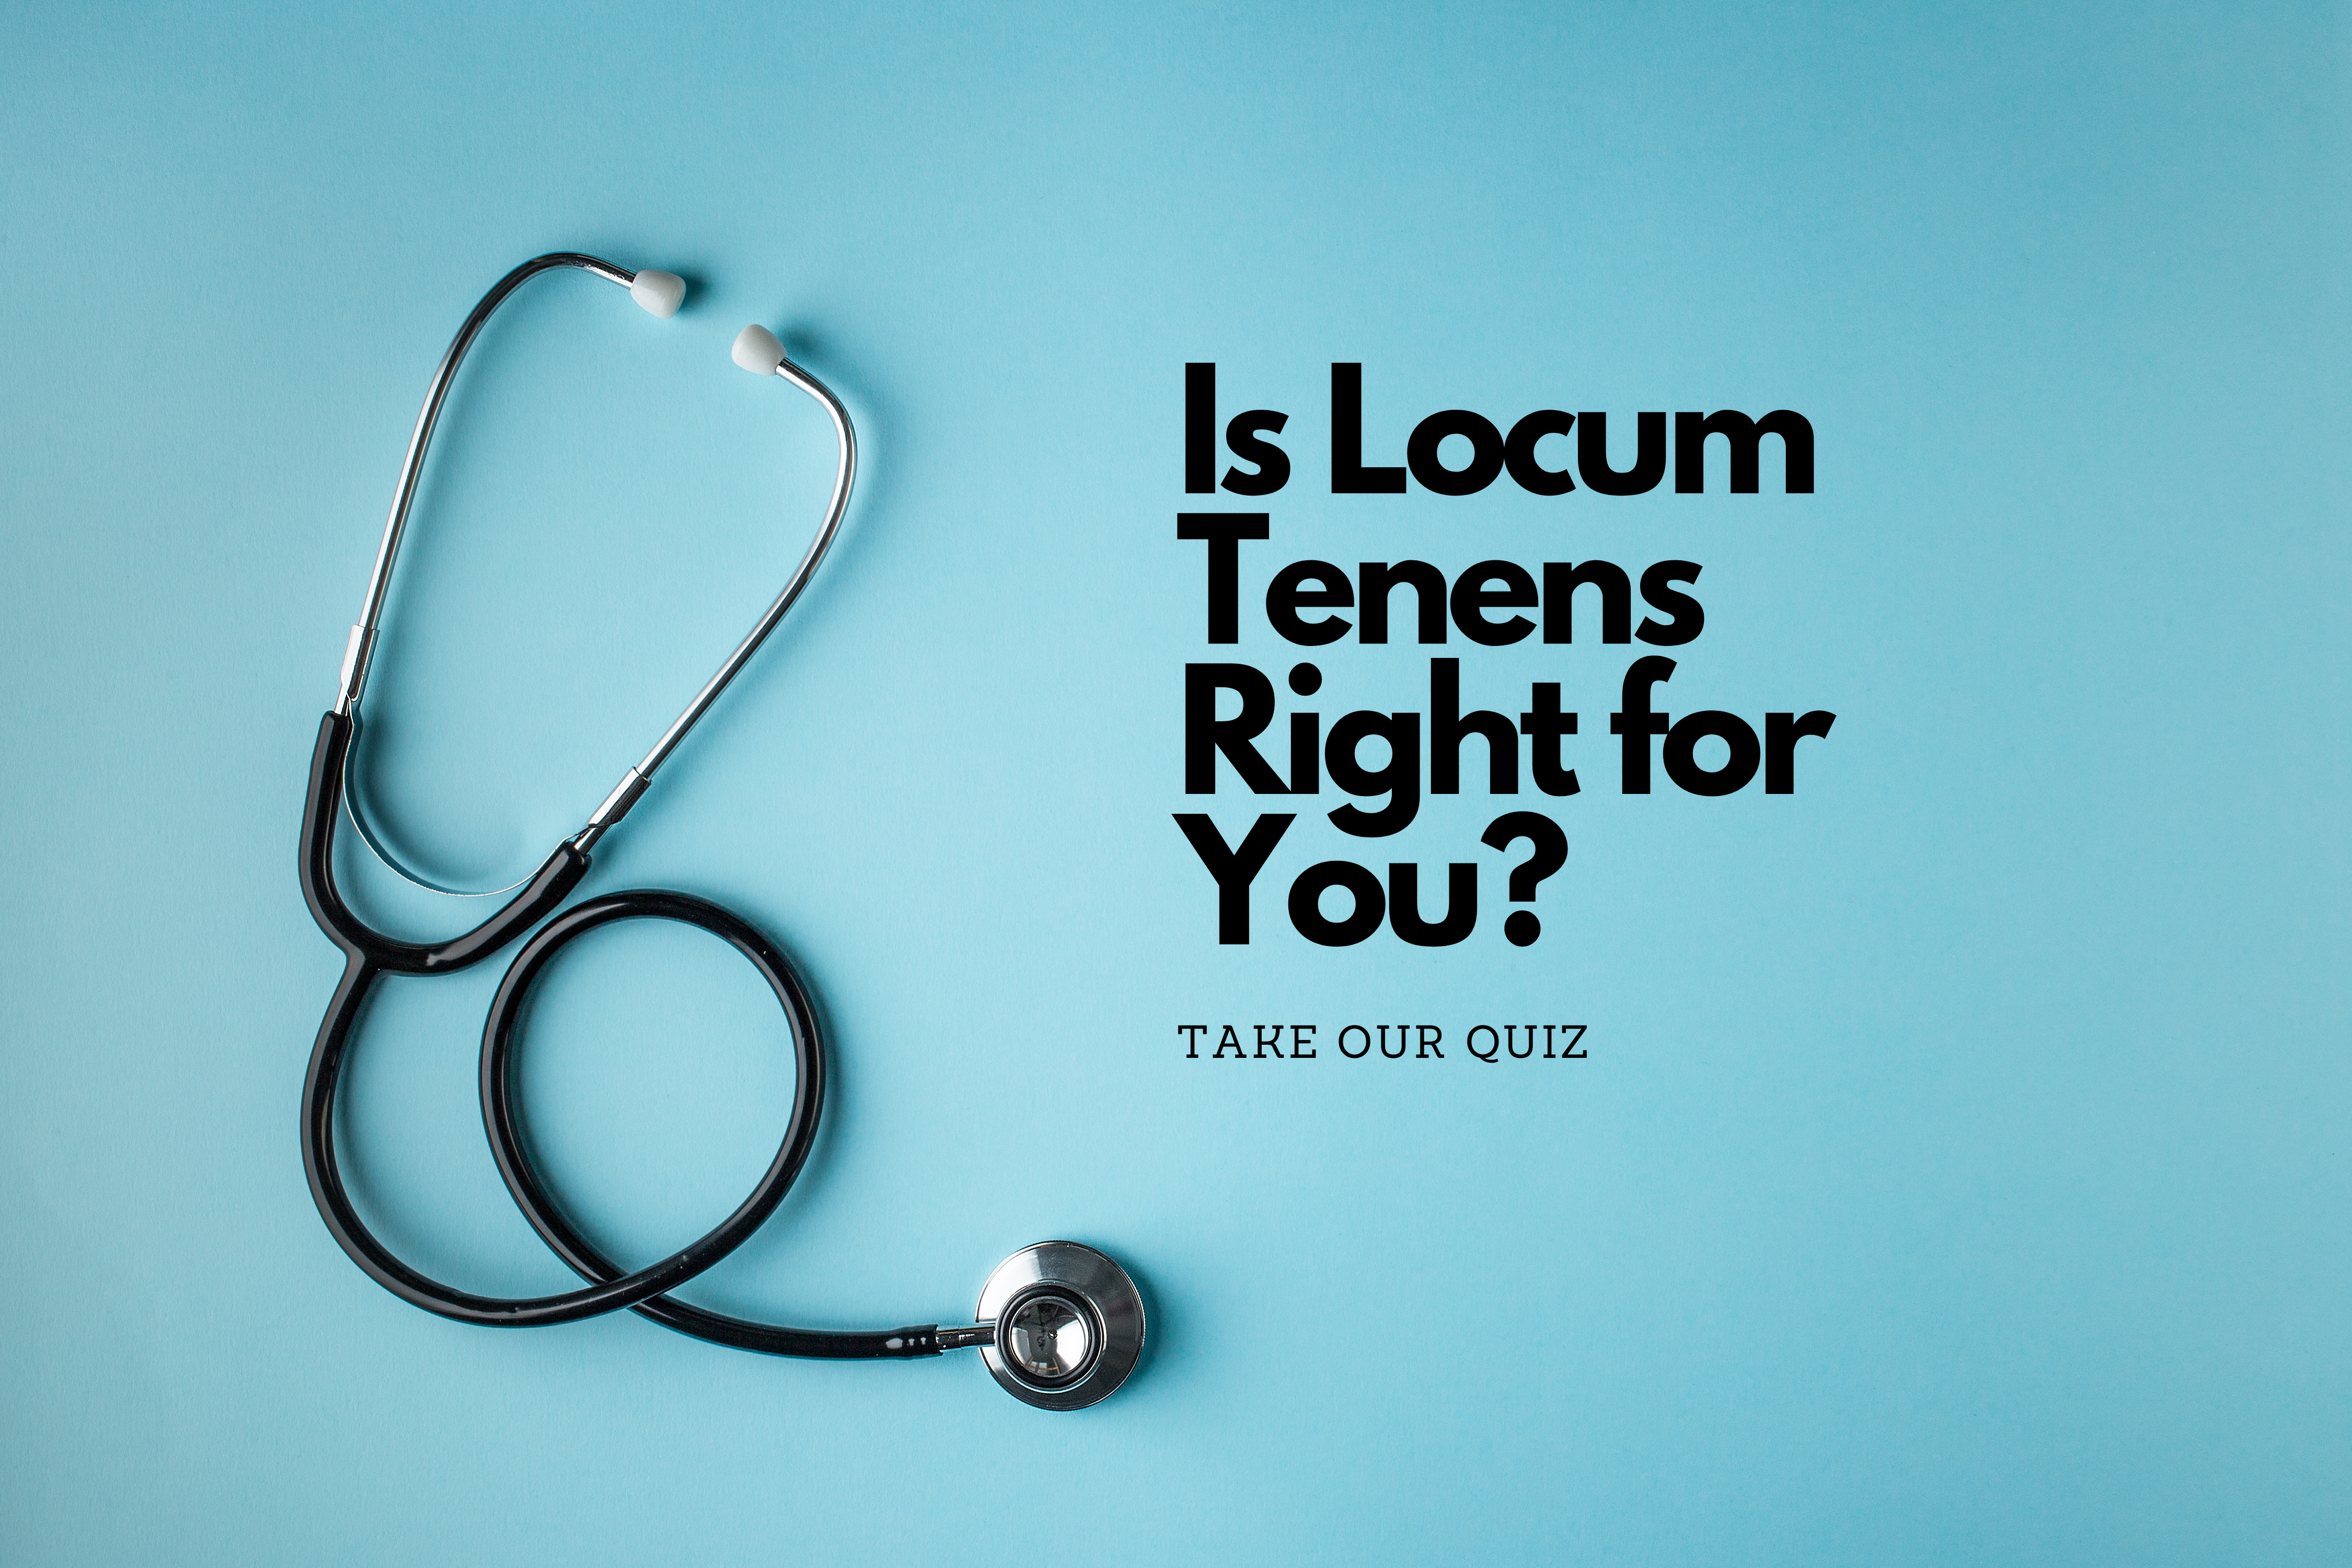 Think You're Cut Out for Locum Tenens? Take Our Quiz